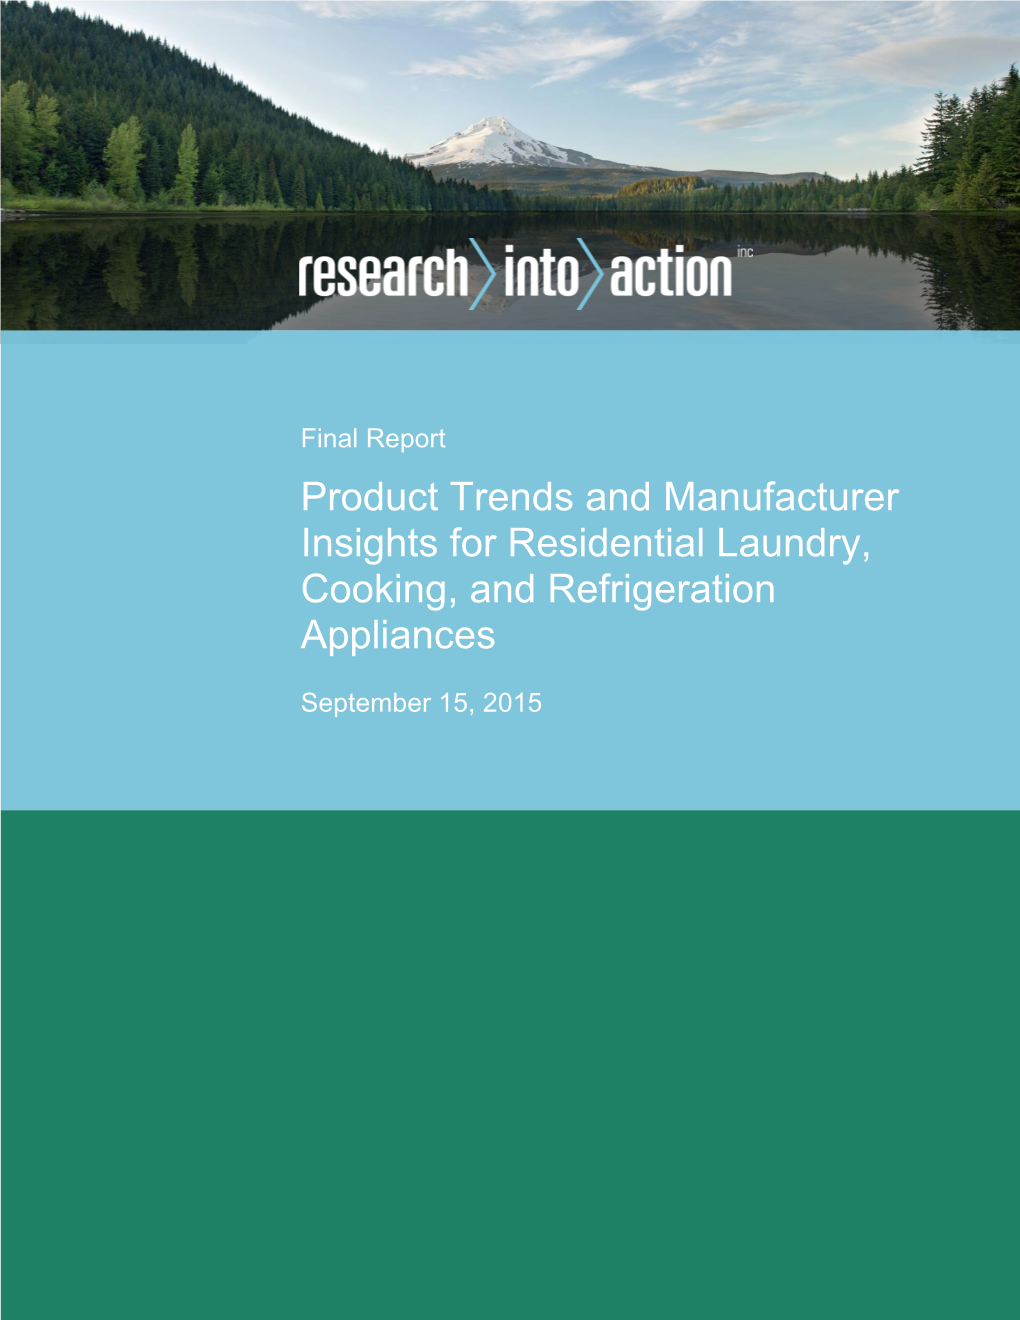 Product Trends and Manufacturer Insights for Residential Laundry, Cooking, and Refrigeration Appliances